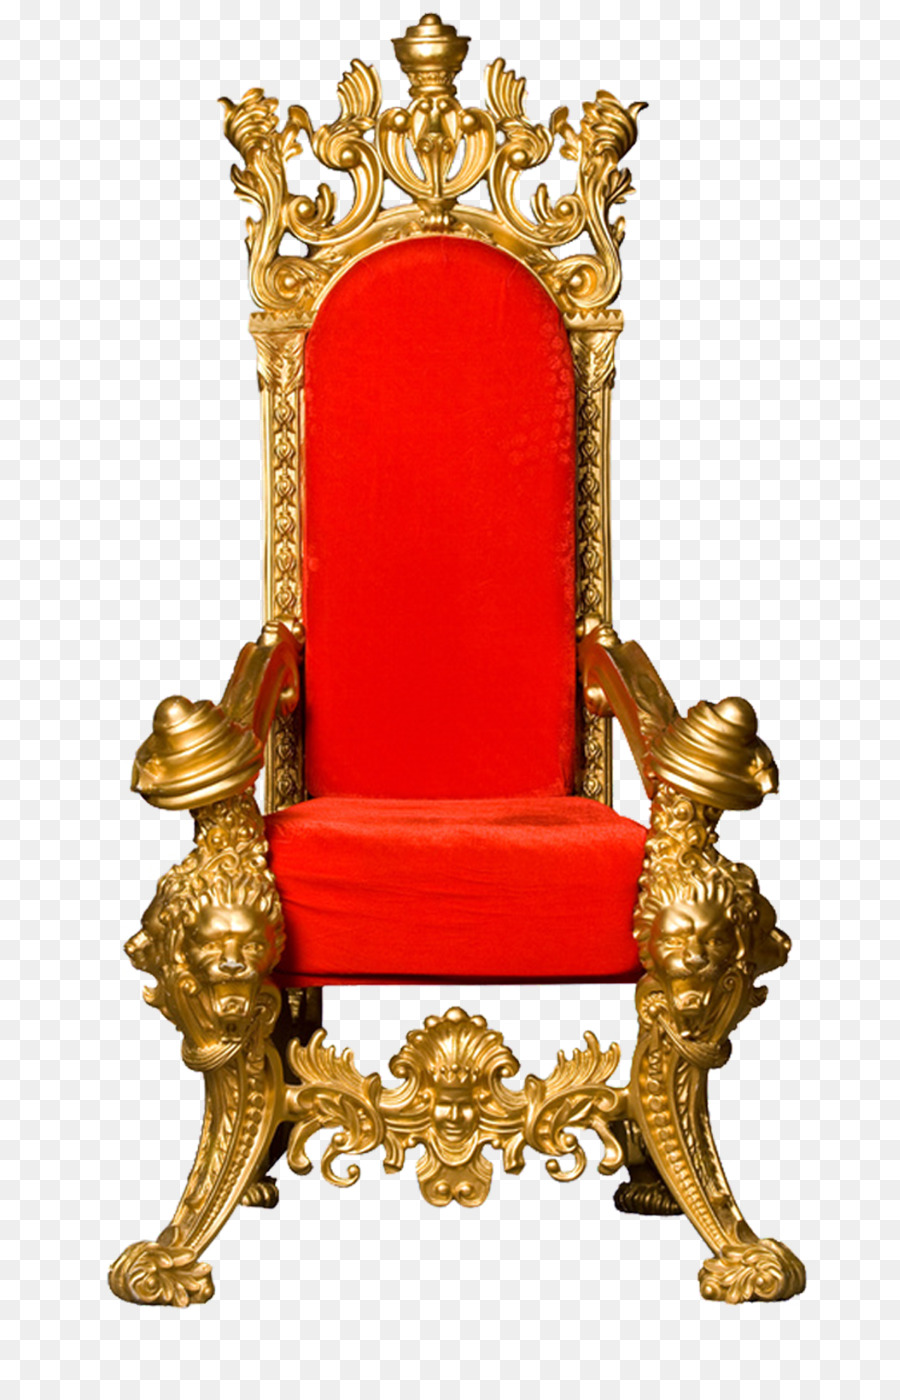 King On A Throne Png & Free King On A Throne.png Transparent.